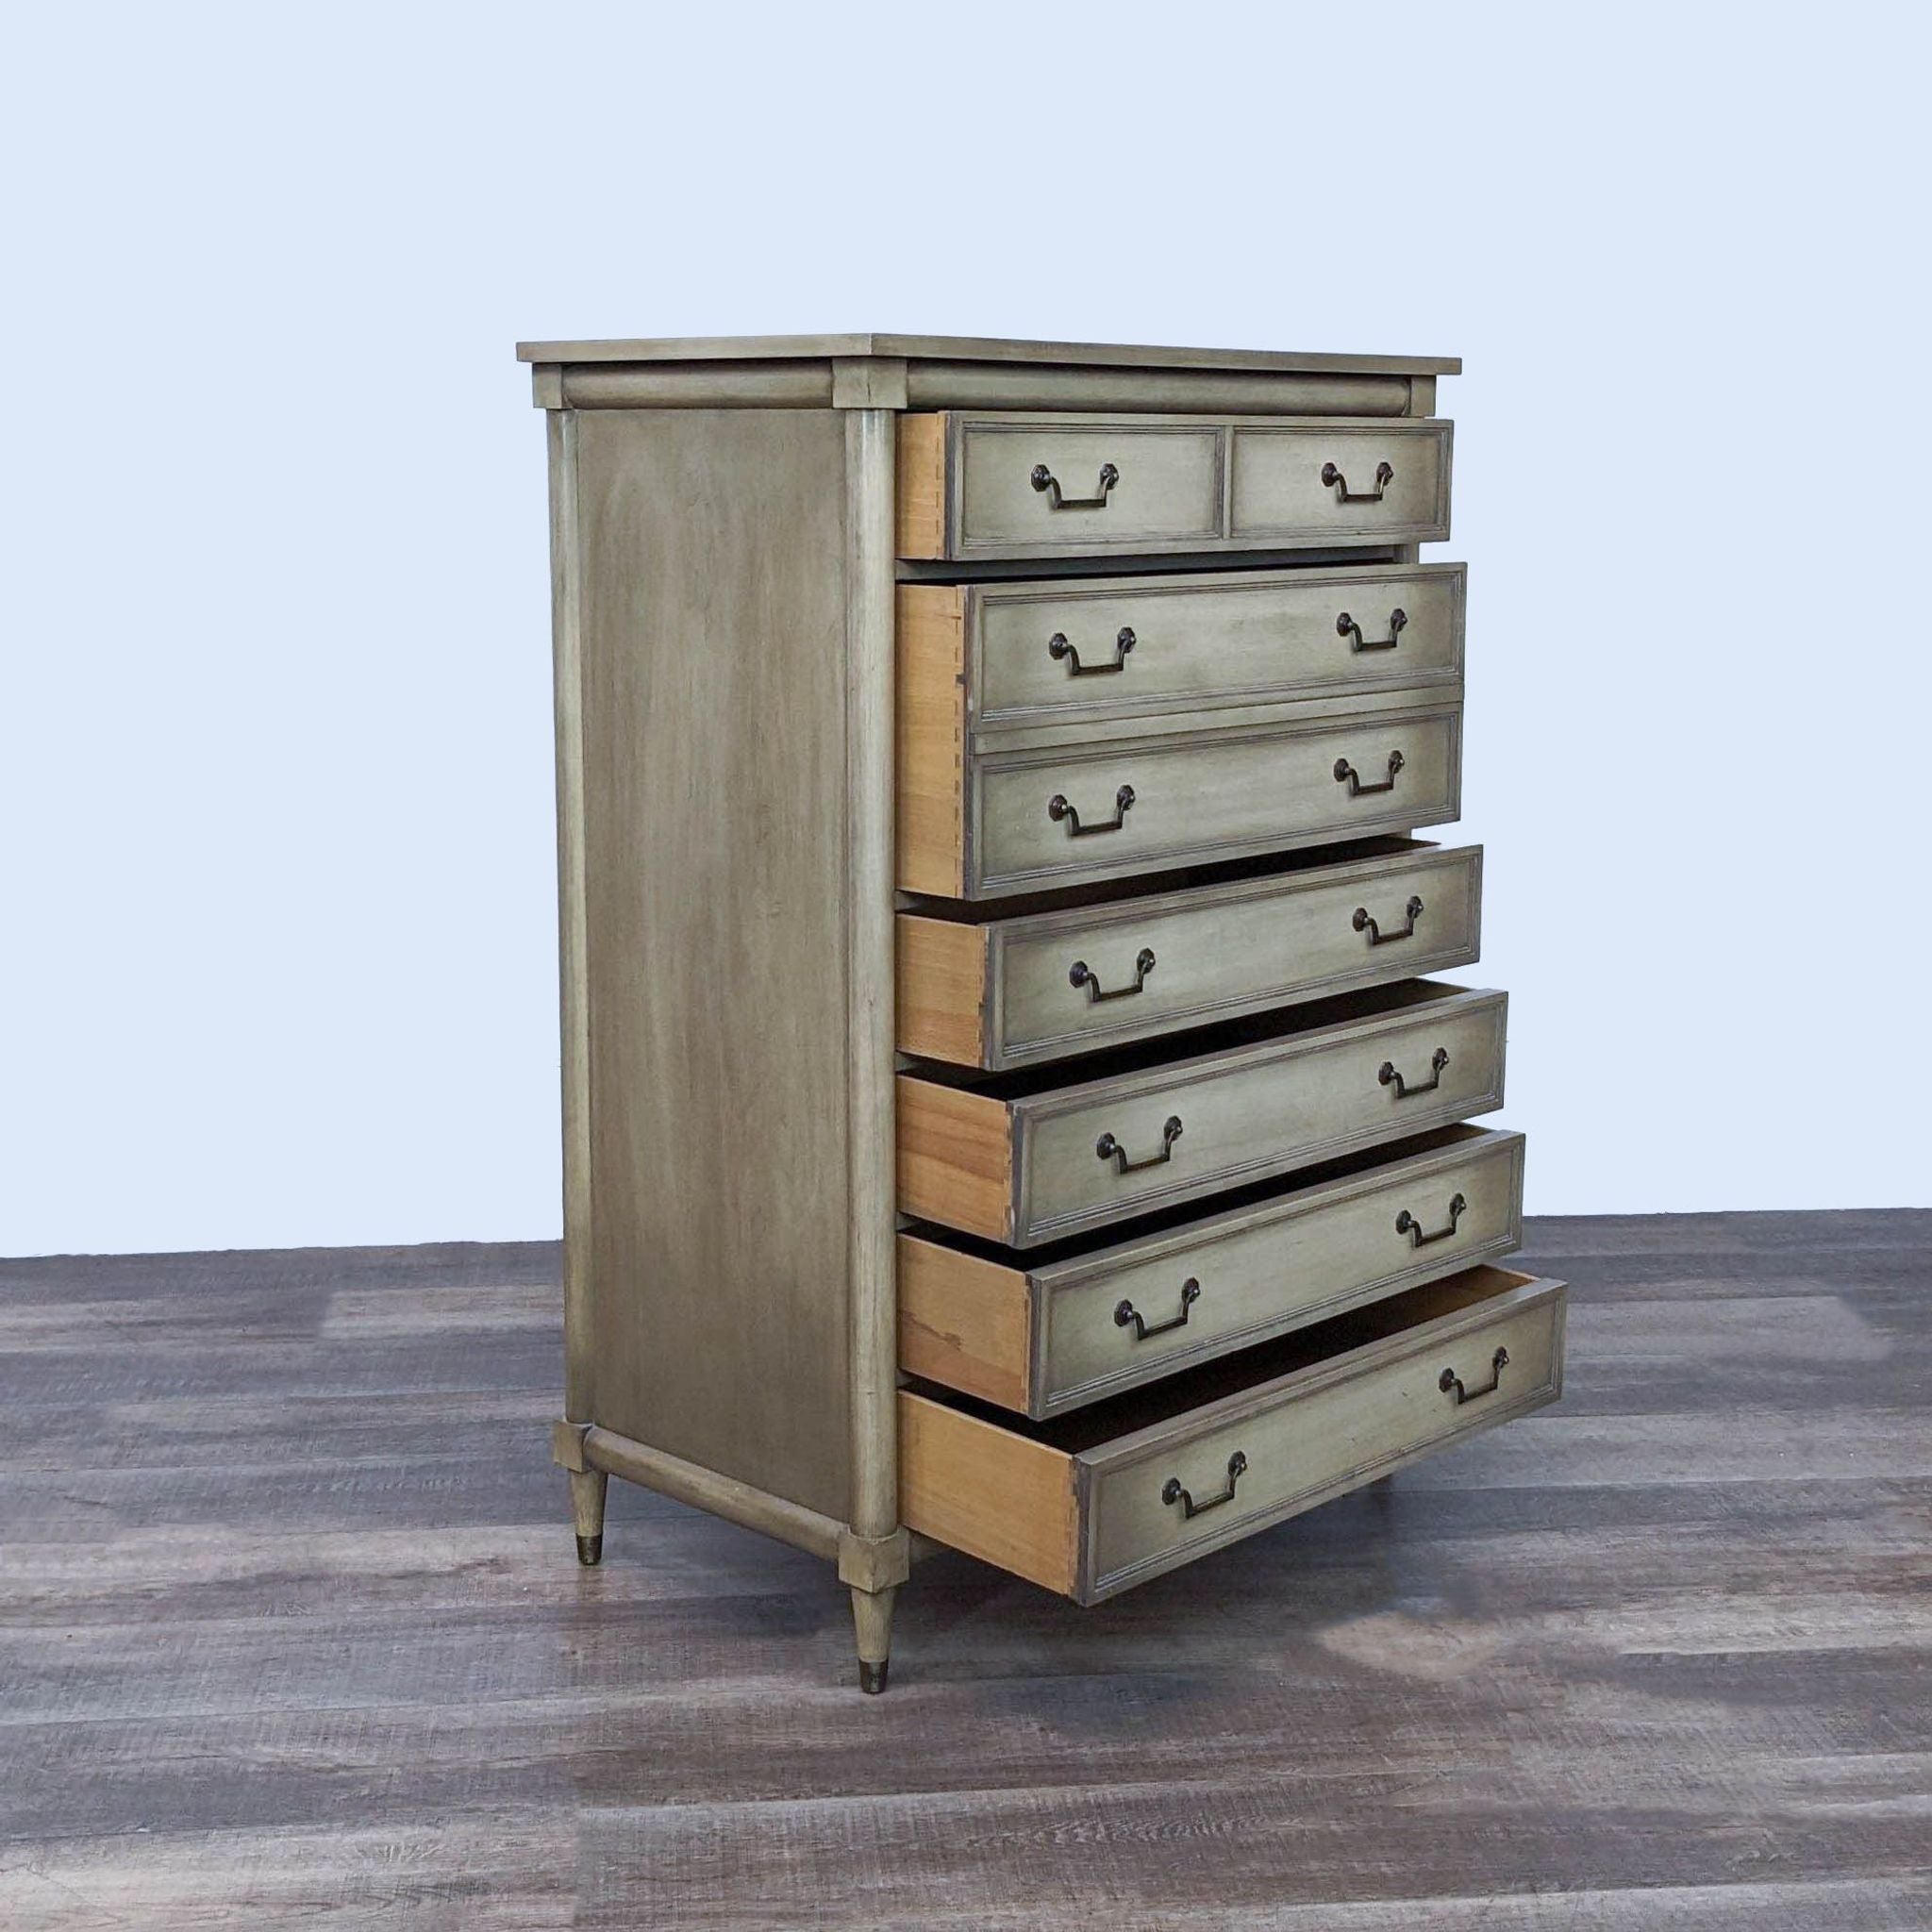 Alt text 2: Open drawer view of a classic Reperch wooden dresser, showcasing its spacious storage and rustic finish on a wooden floor.